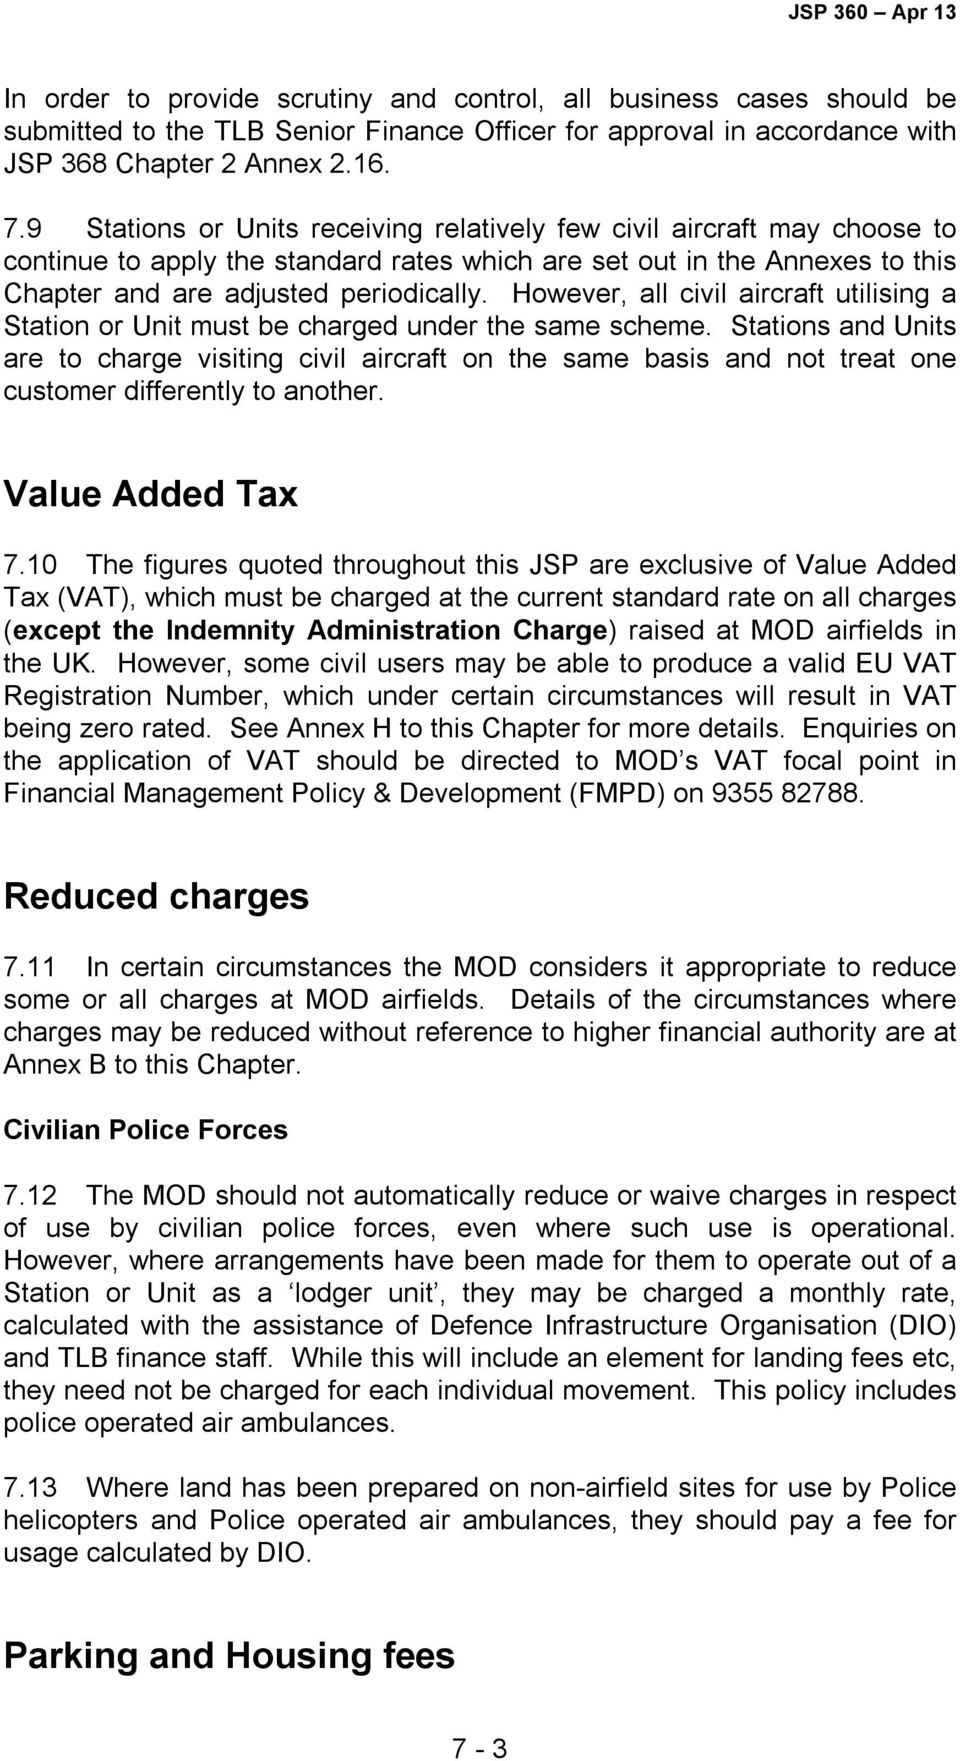 However, all civil aircraft utilising a Station or Unit must be charged under the same scheme.